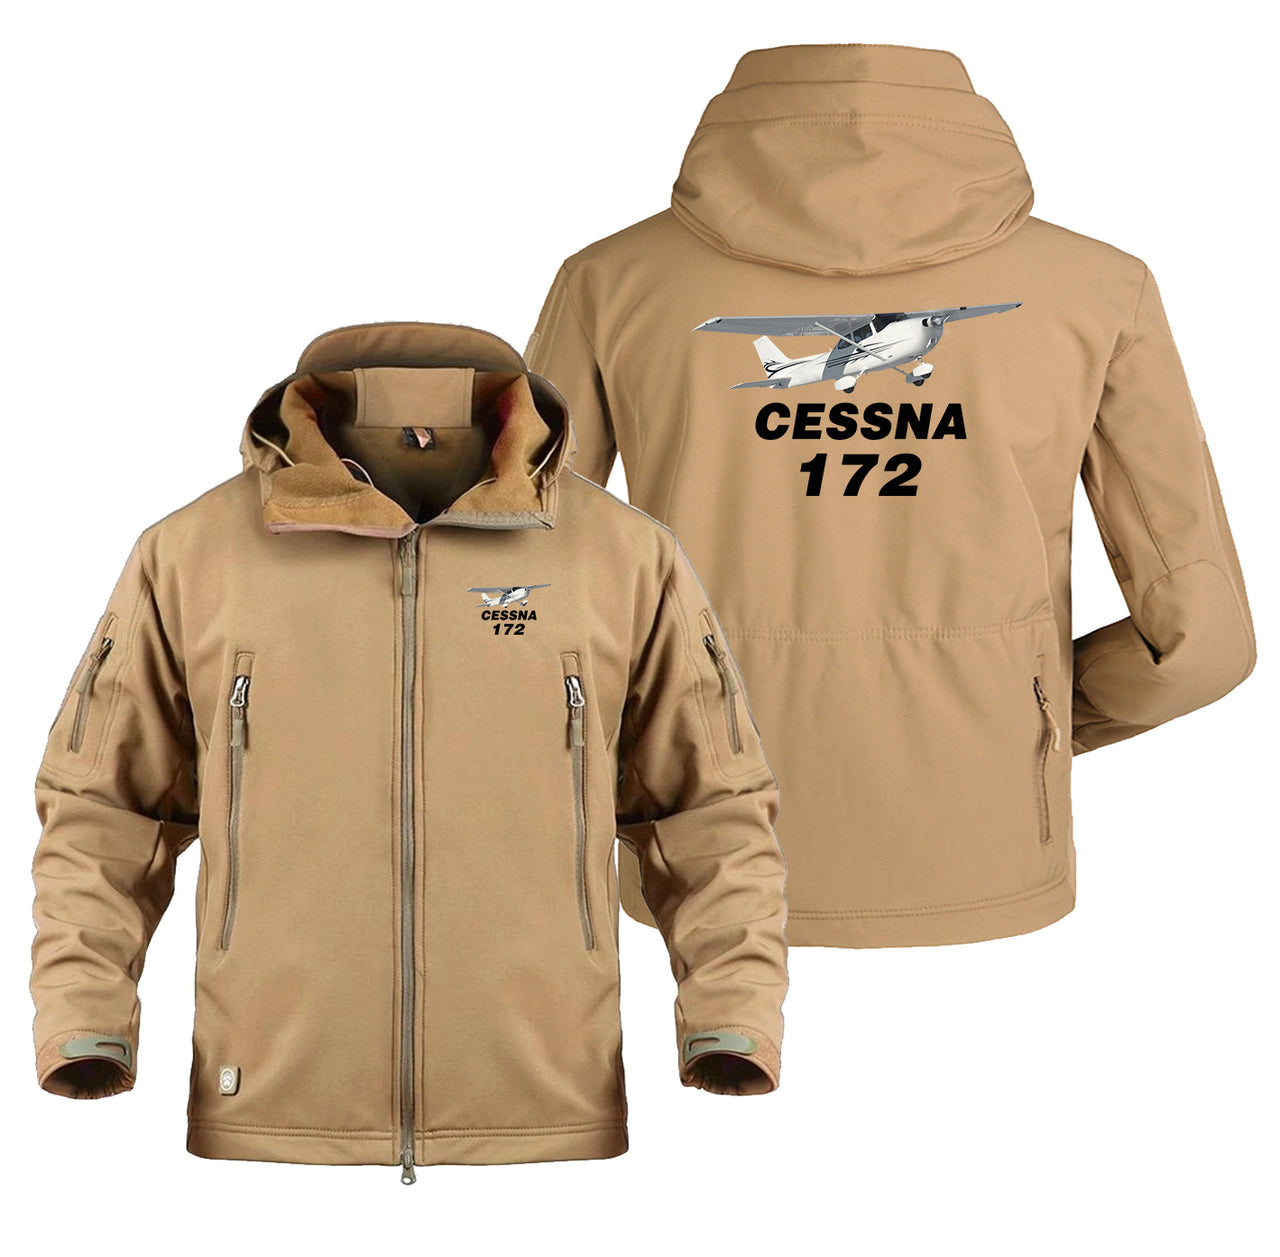 The Cessna 172 Designed Military Jackets (Customizable)